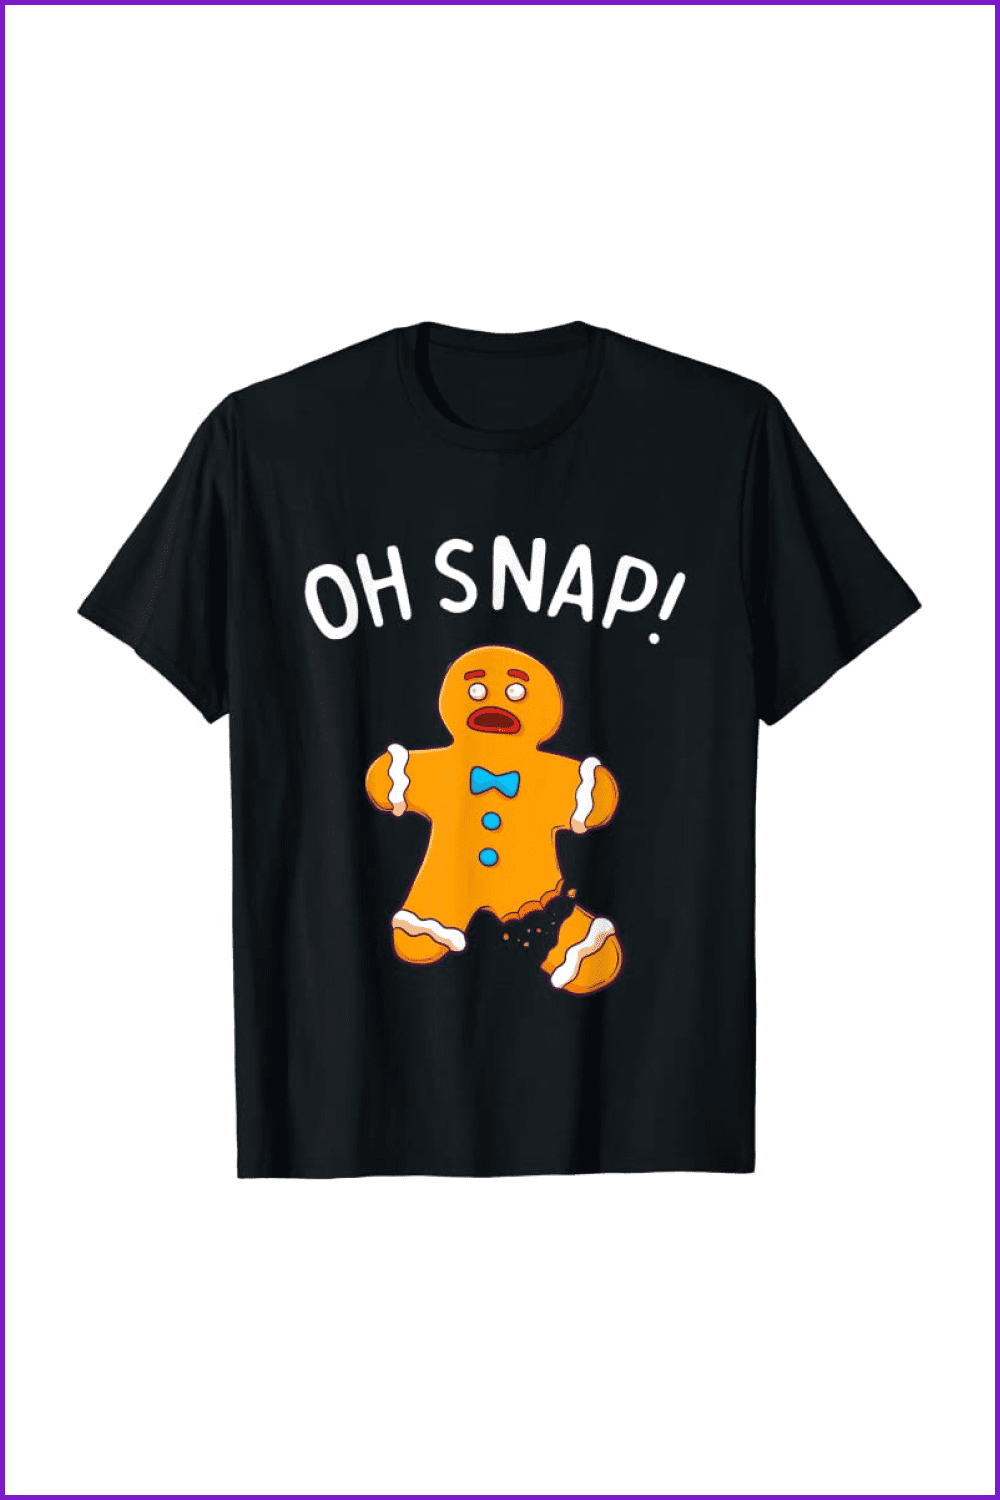 Black t-shirt with Gingerbread with a severed leg.